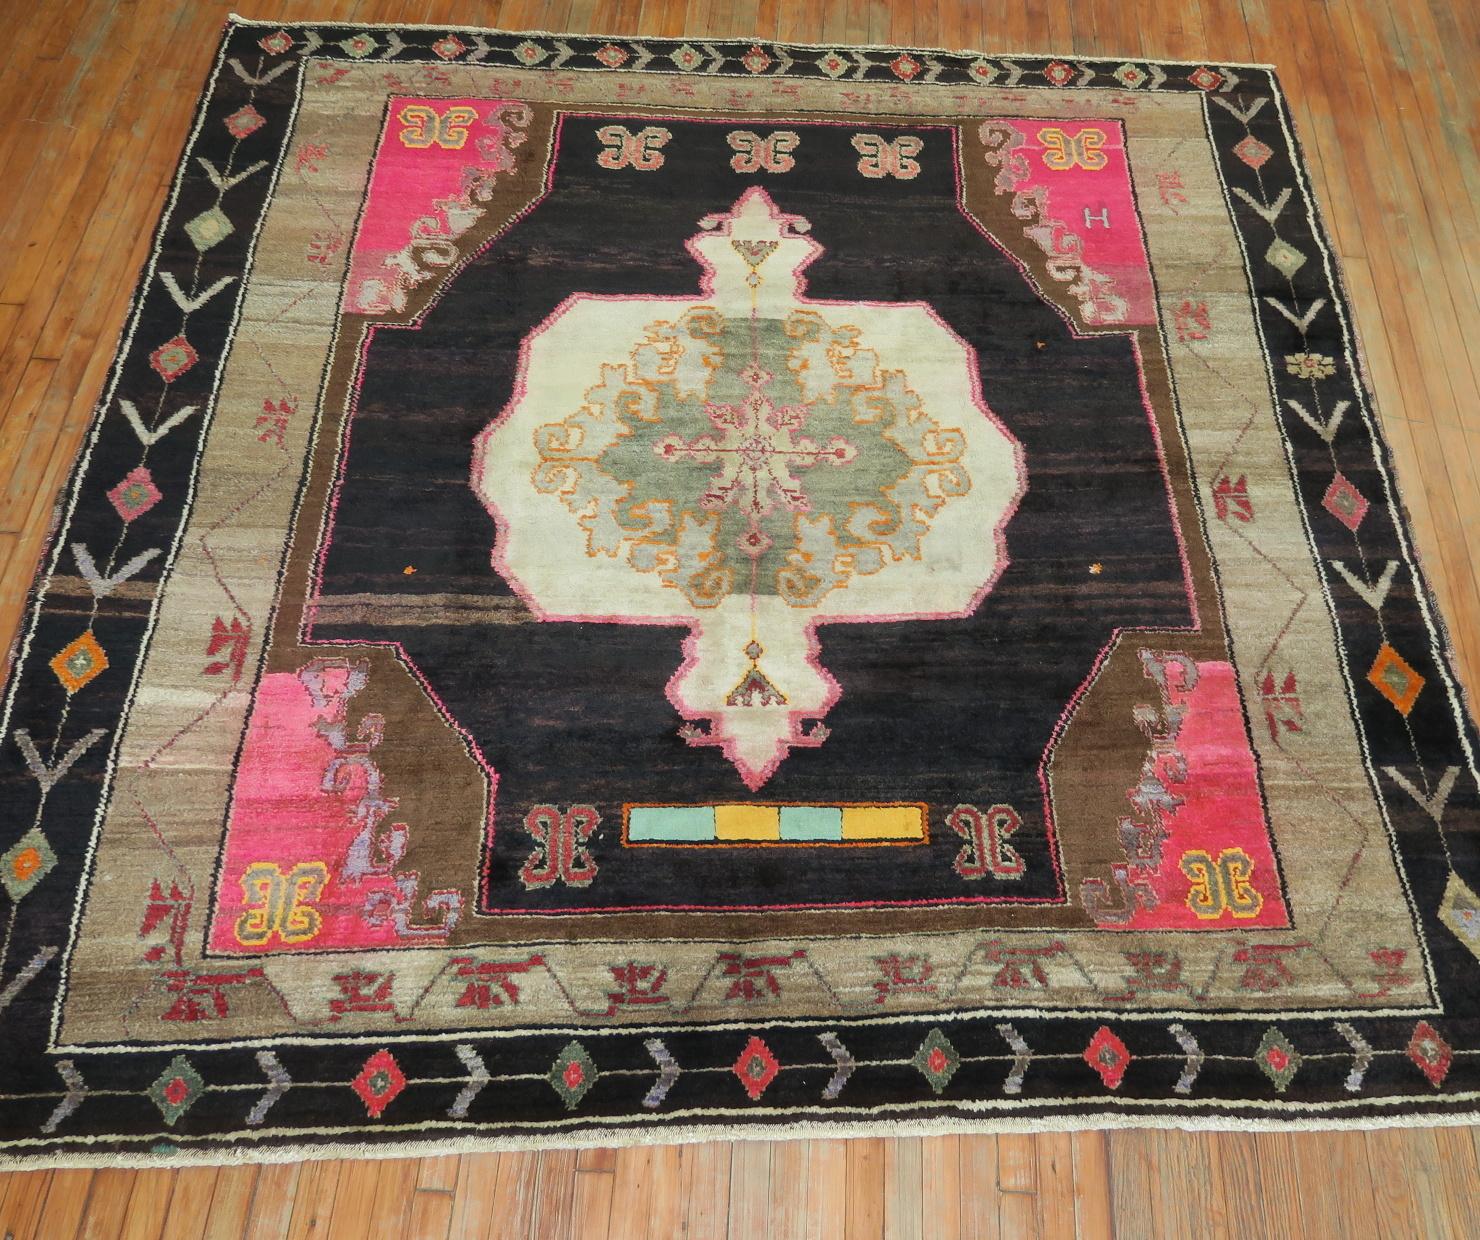 A wild 20th century Turkish Kars square size rug. A large scale floral design featuring a white medallion on a dark brown field, accents in bright pink with a geometric border. Looks like it’s been barely used. Previous owner must have used it in